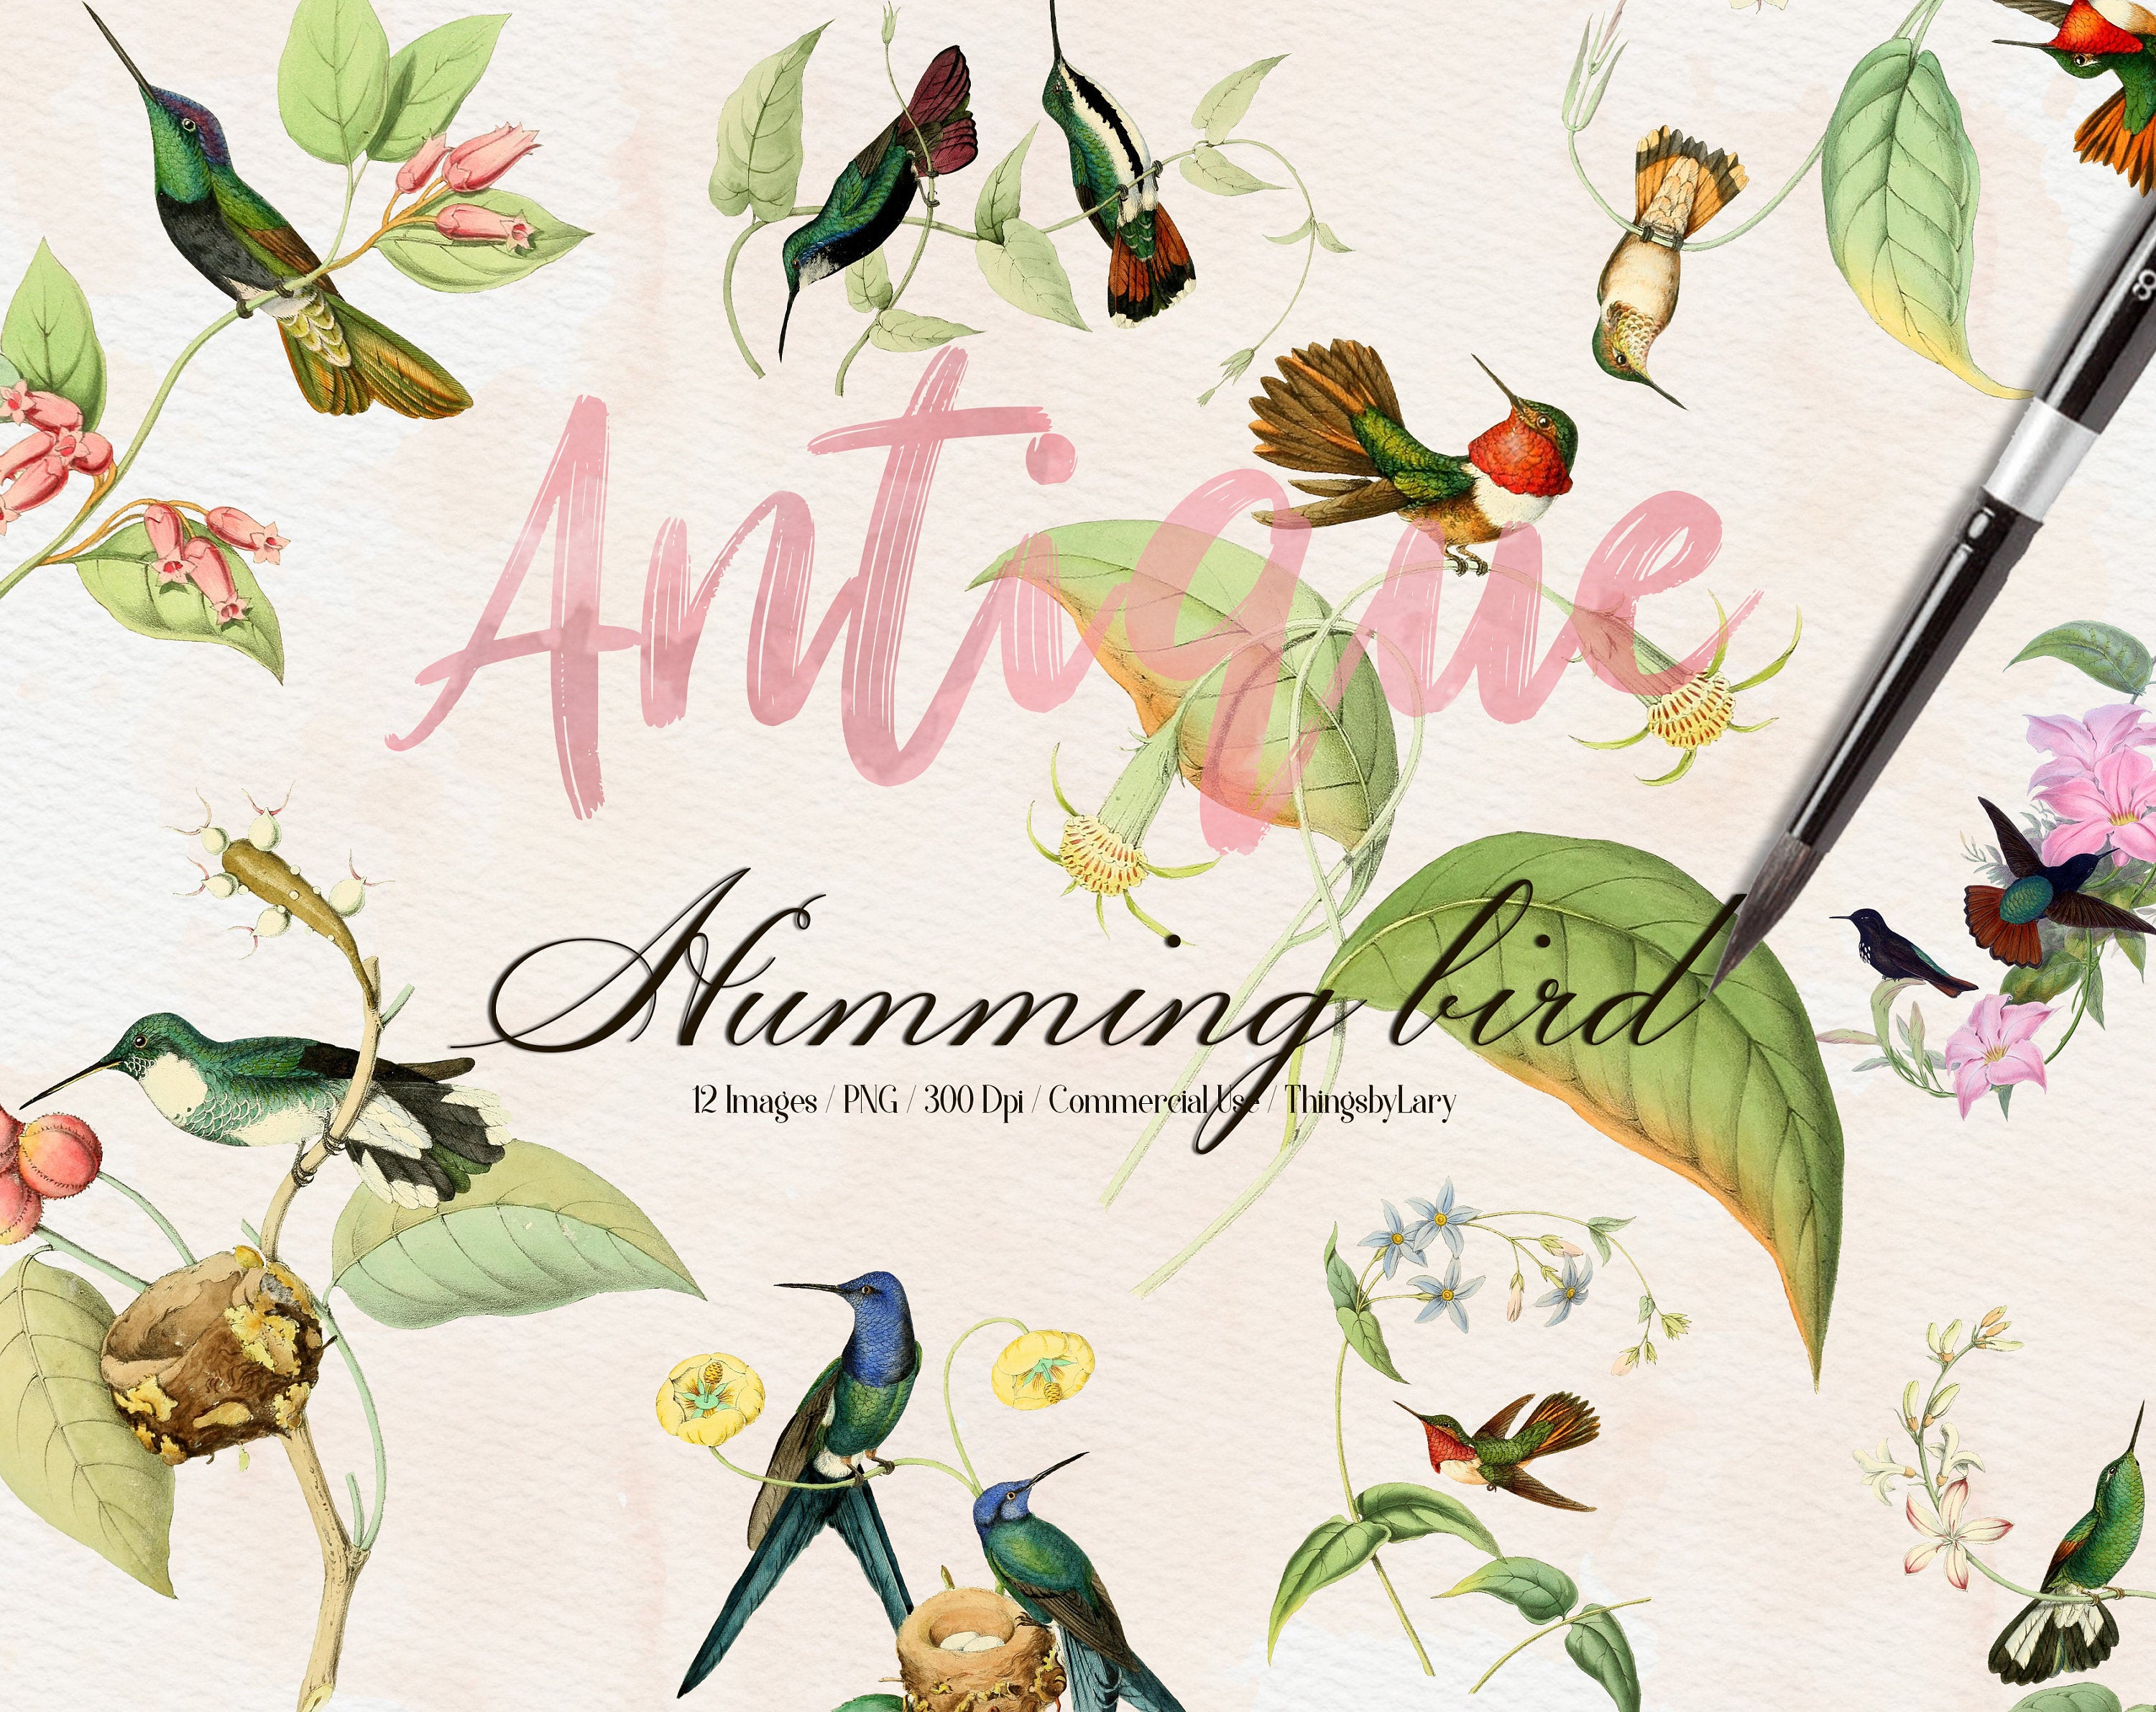 12 Vintage Humming Birds Ephemera Isolated Transparent Digital Images 300 Dpi PNG Instant Download Commercial Use Antique Shabby Chic Nature